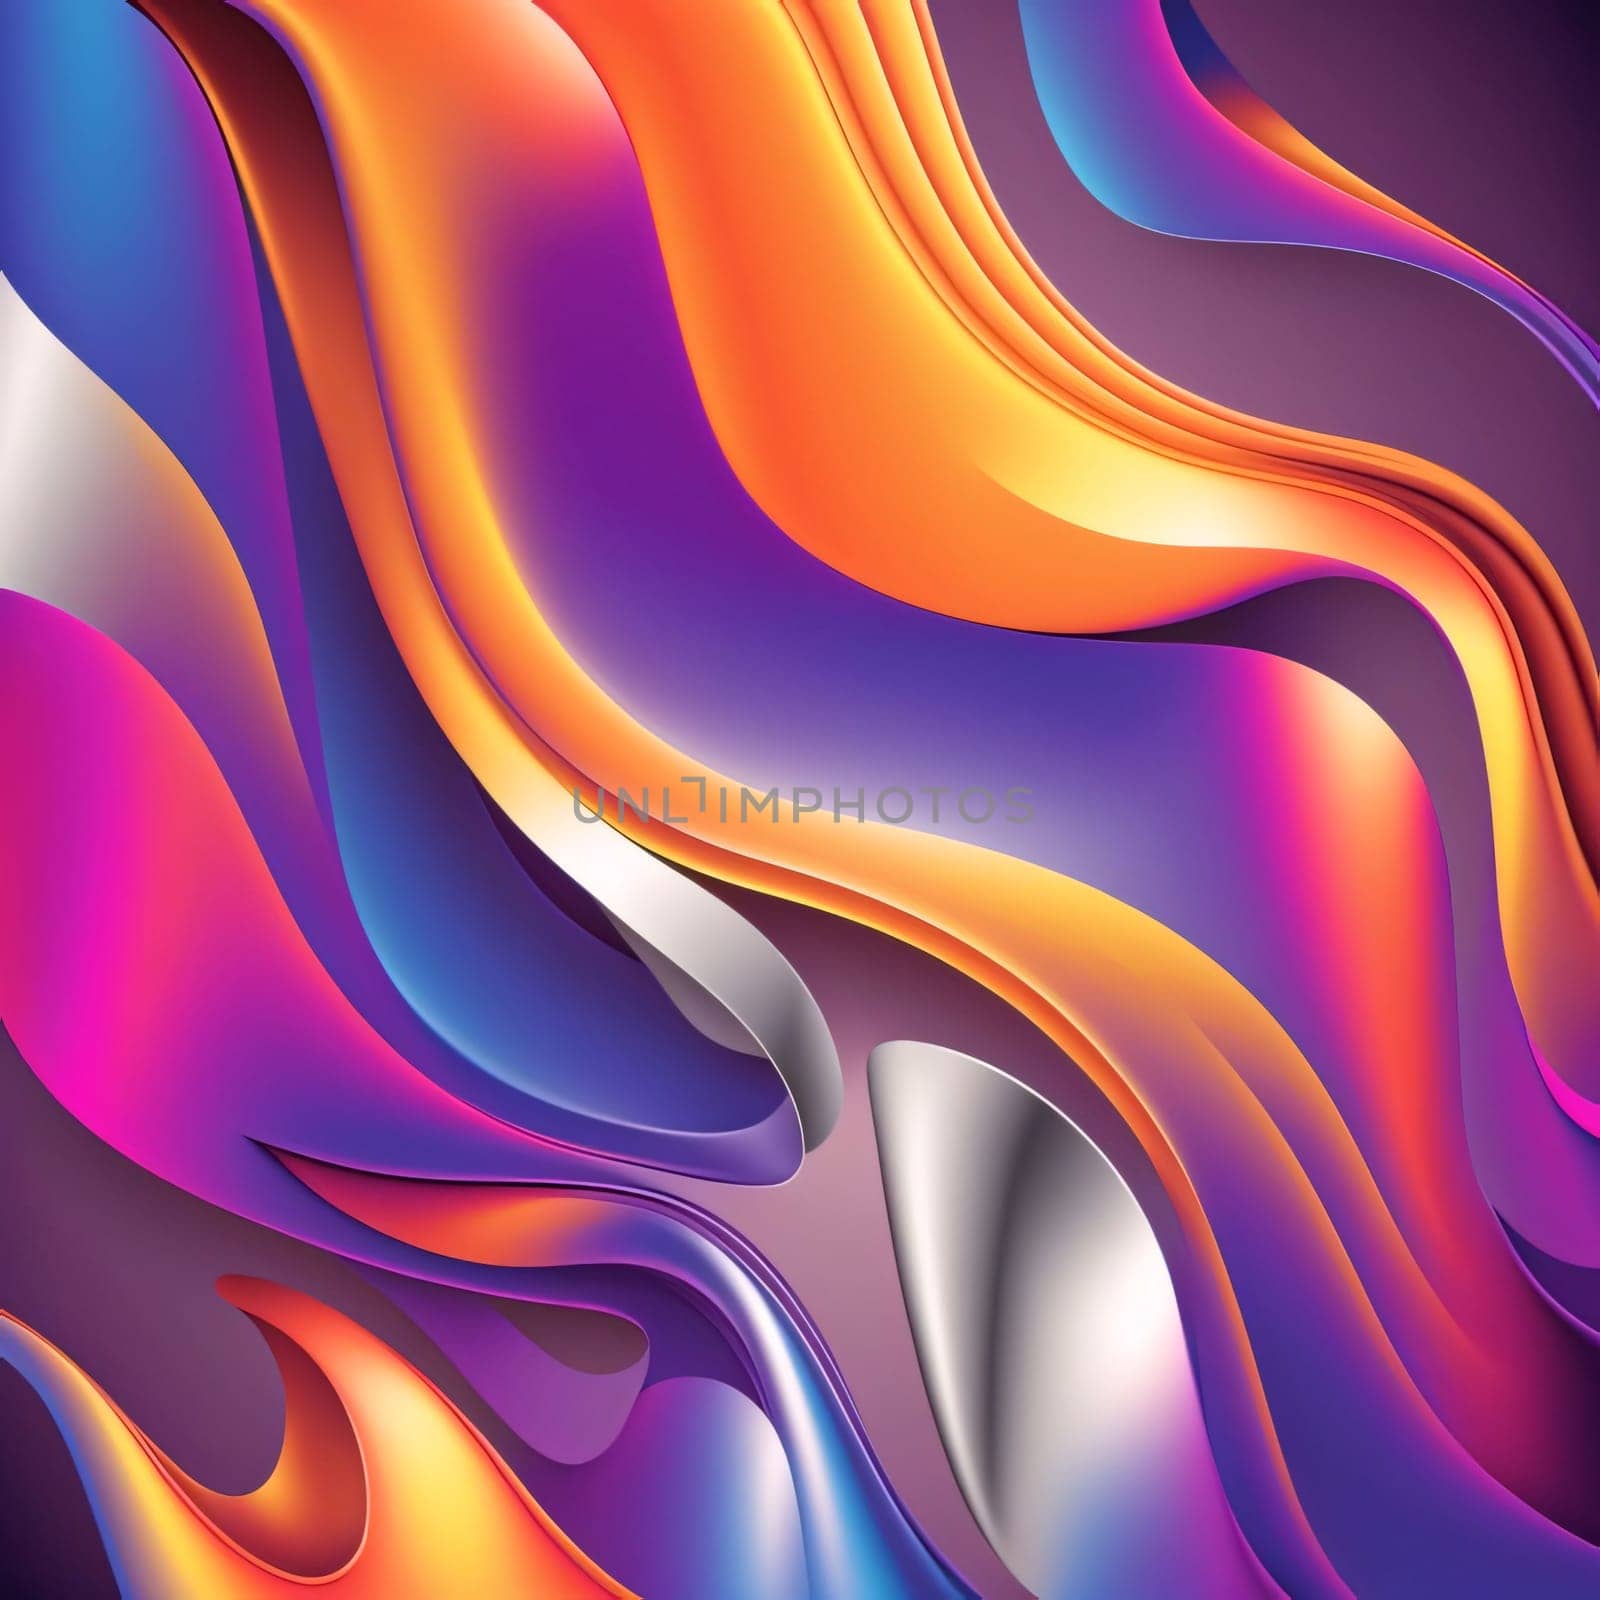 Abstract background design: Colorful abstract background with wavy lines. Vector Illustration.